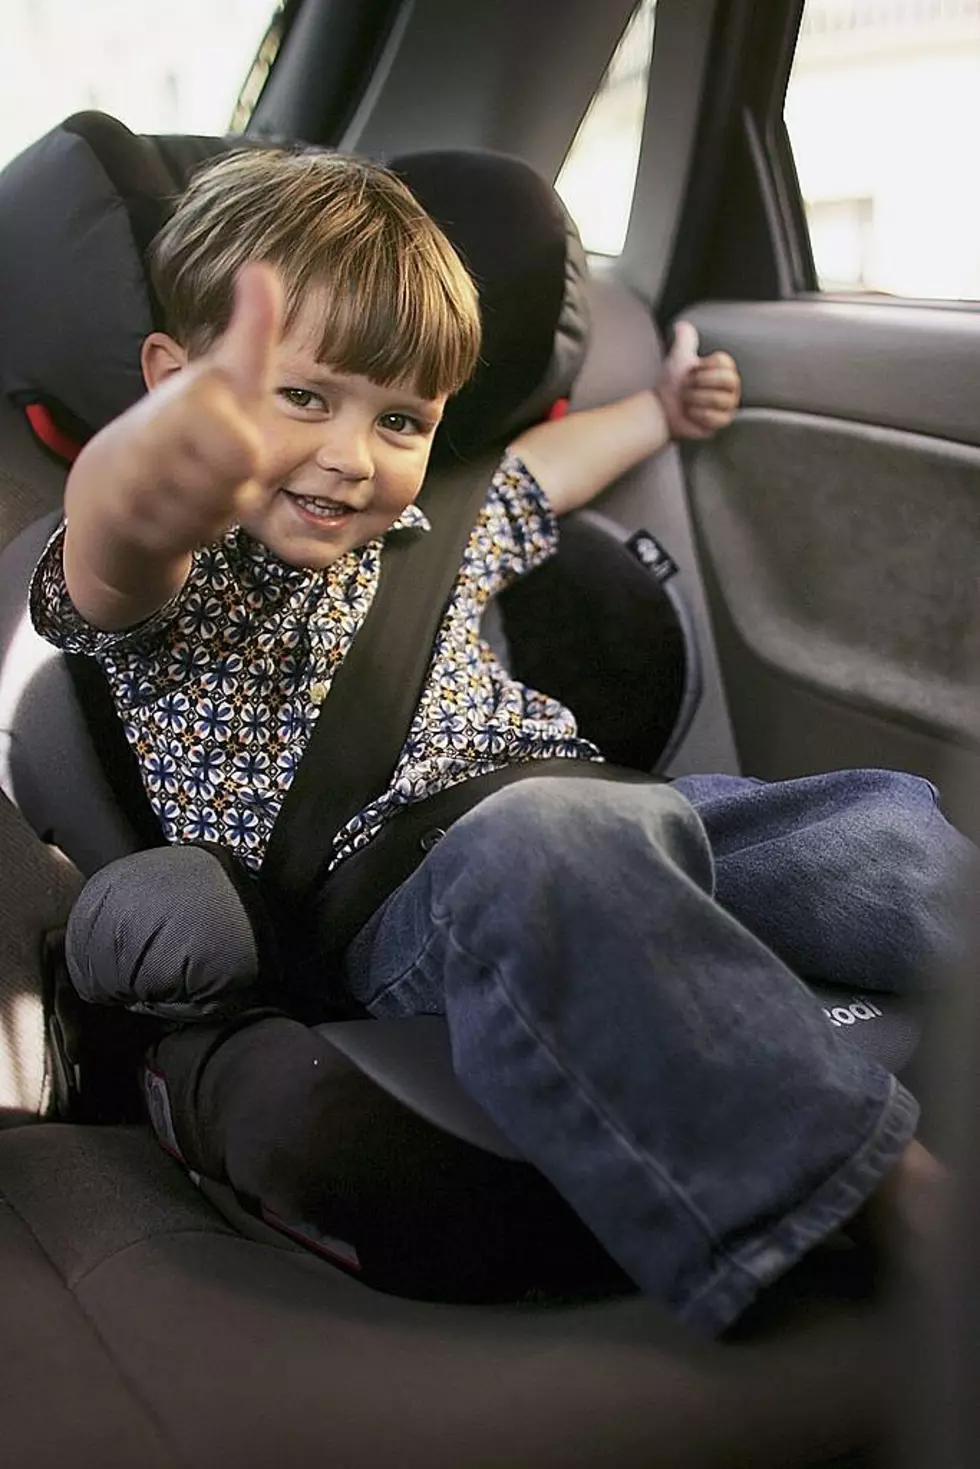 Free Child Seat Inspections September 19 in West Davenport